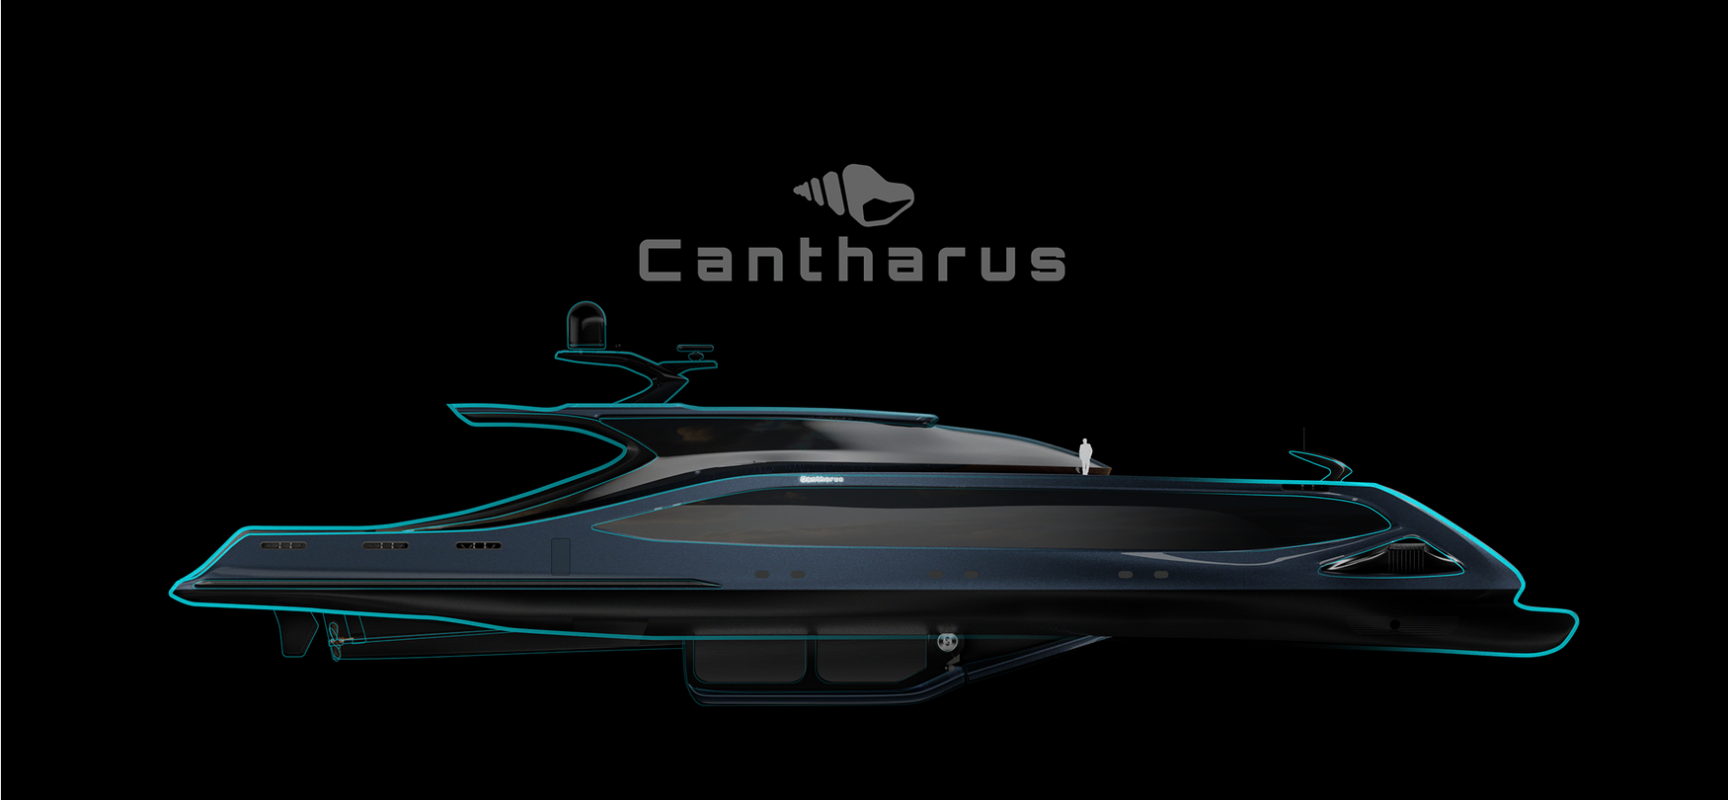 Cantharus is a superyacht with panoramic views to spare. This 226′ concept comes with all the lu ...